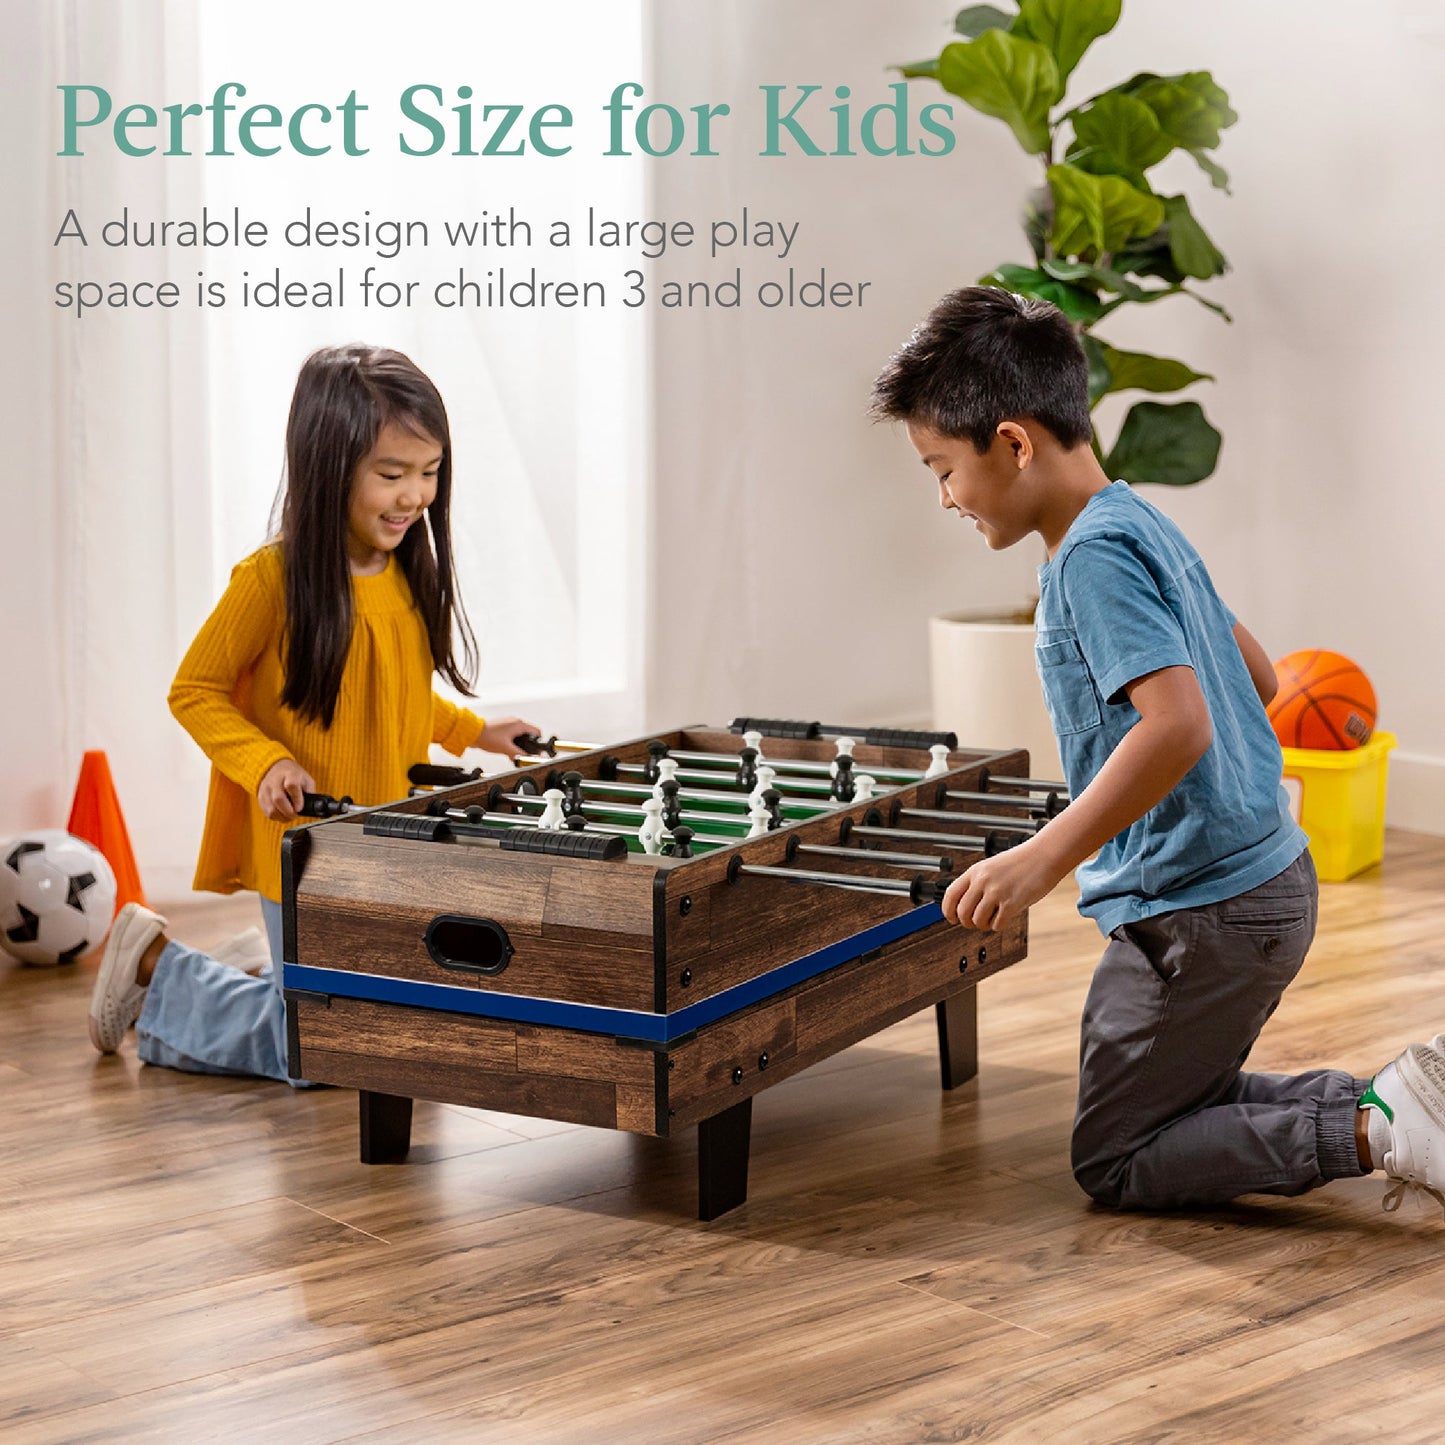 11-in-1 Combo Game Set w/ Ping Pong, Foosball, Air Hockey, 5 Storage Bags